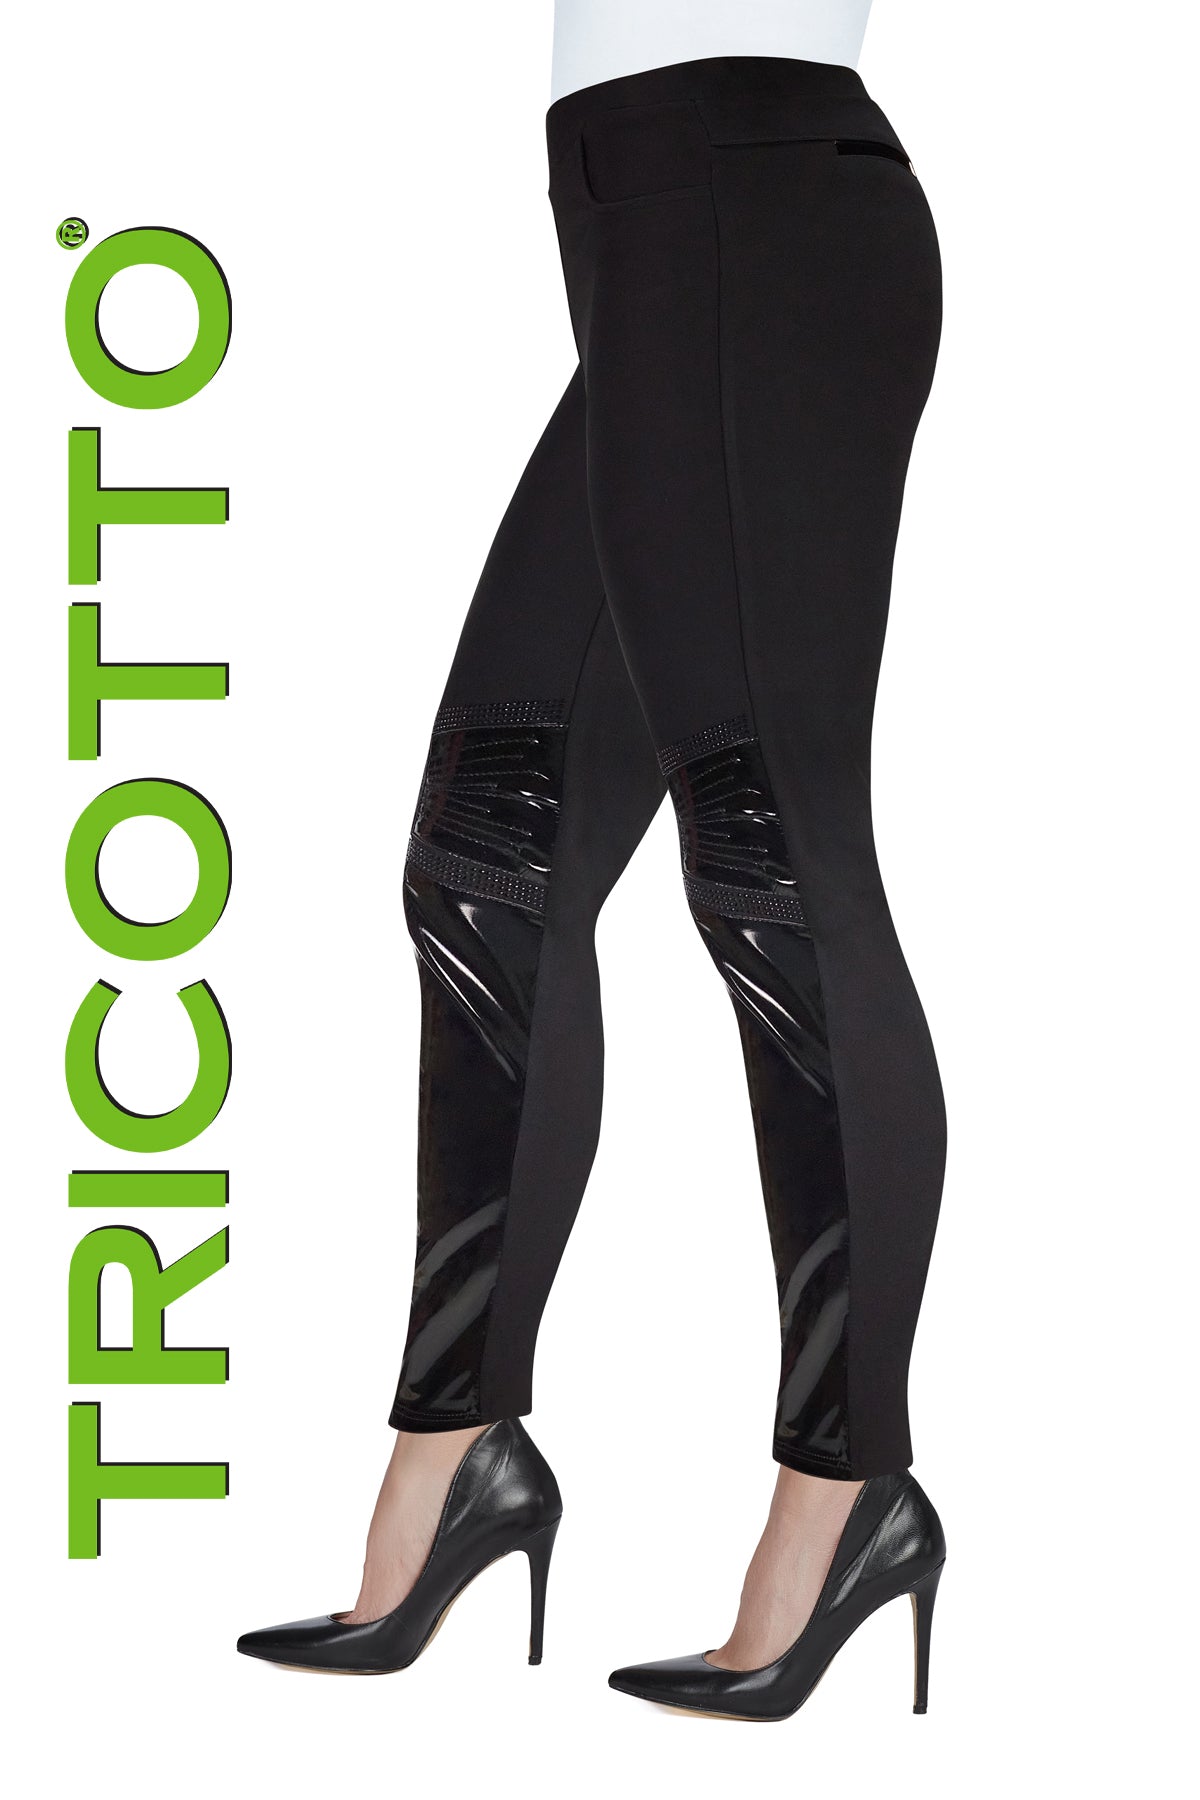 Tricotto Black Pants-Buy Tricotto Pants Online-Tricotto Clothing Montreal-Tricotto Vegan Leather Pants